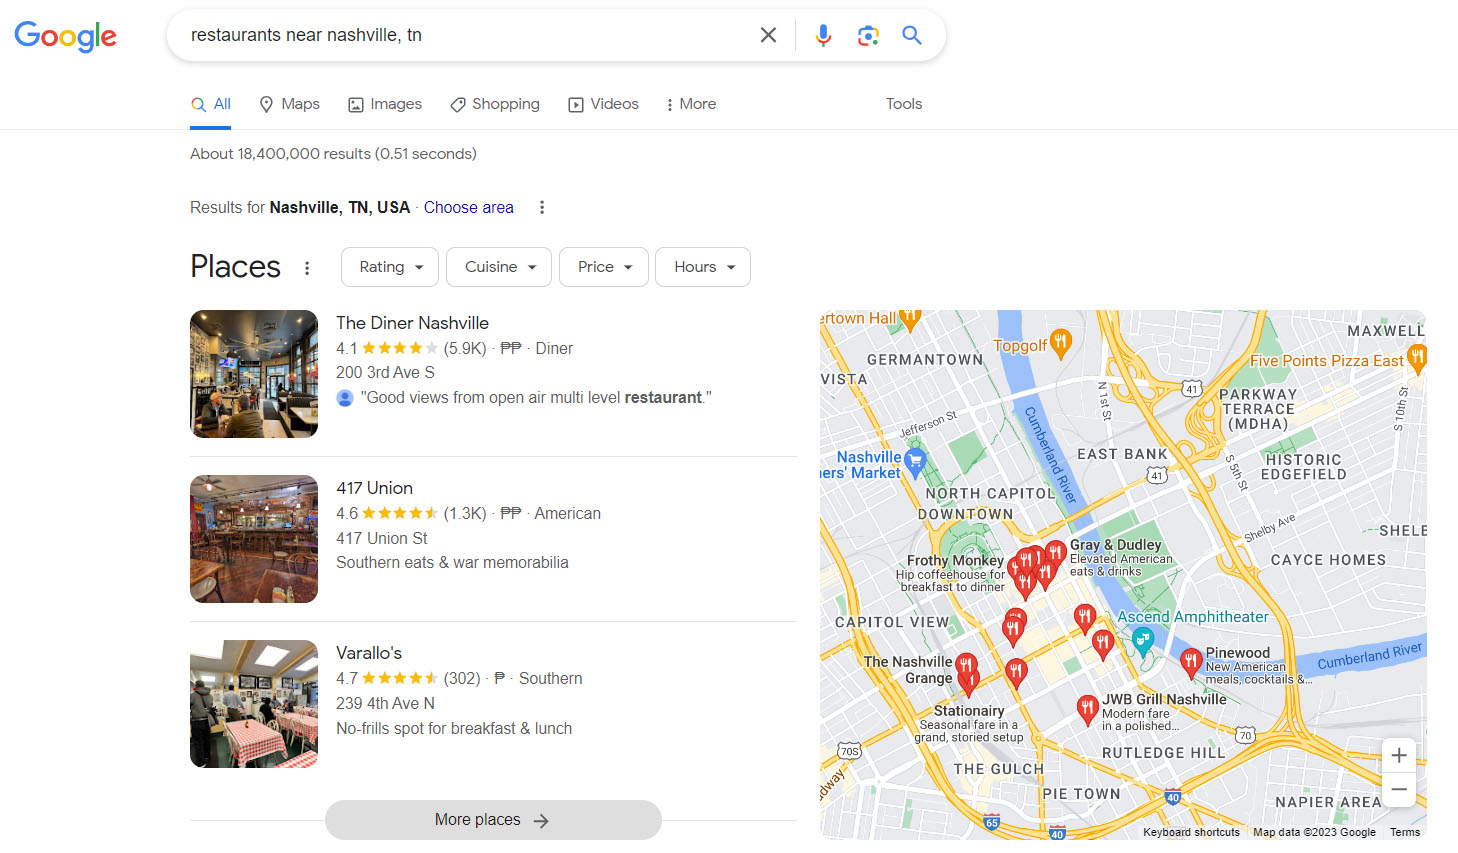 Google search results for restaurants near Nashville, Tennessee.